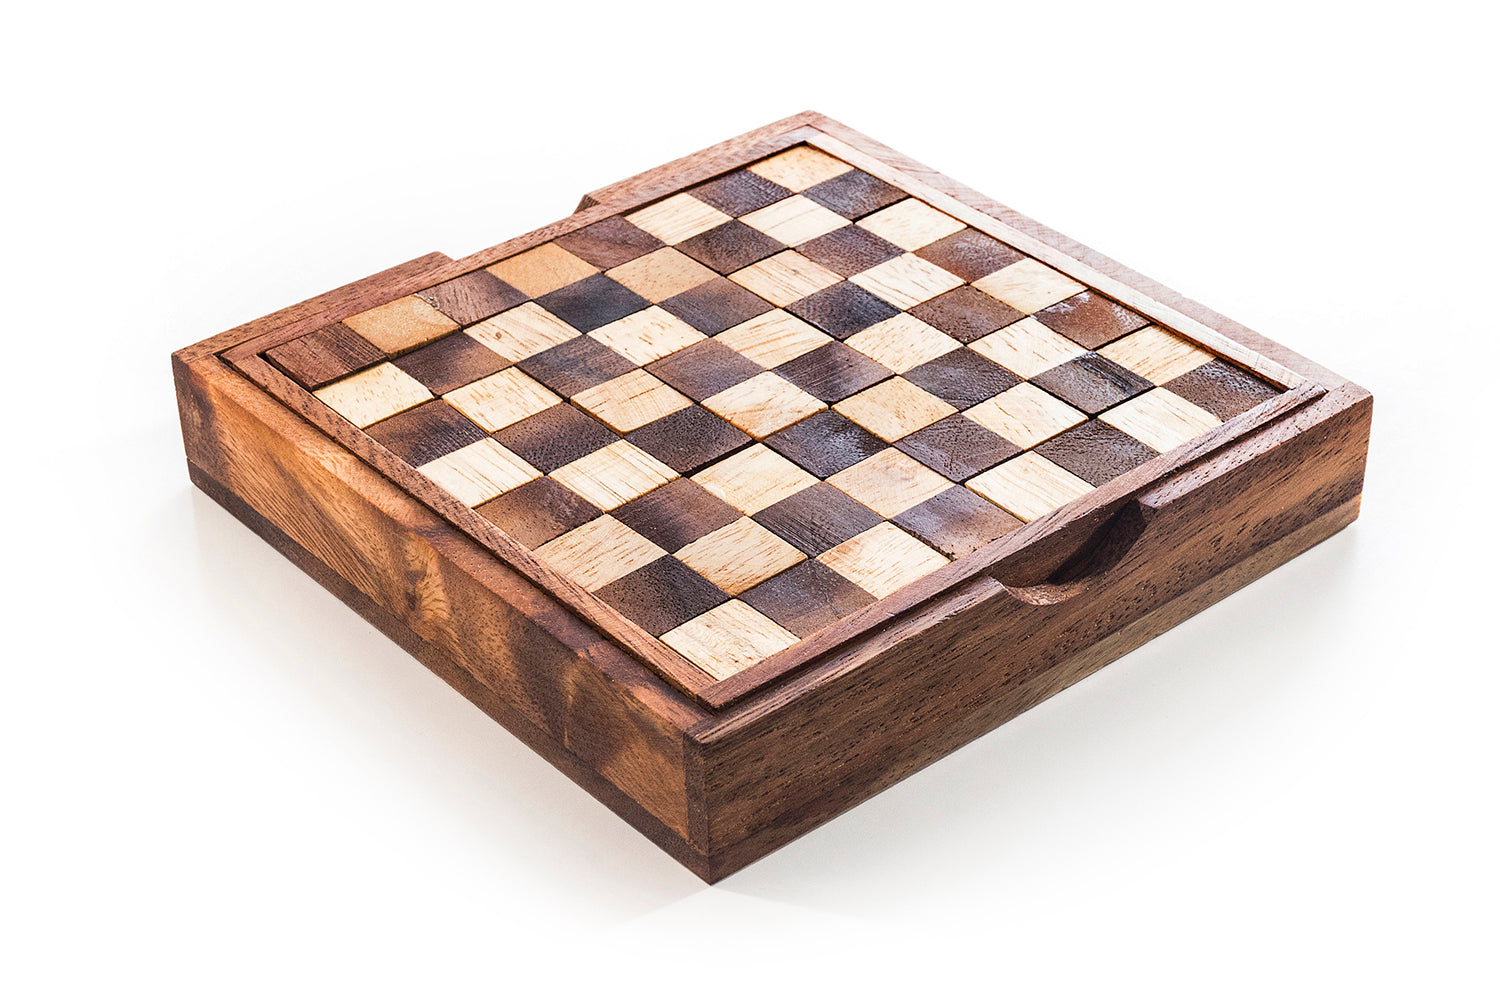 Puzzle 25  (Chessboard and dominos) - GeeksforGeeks